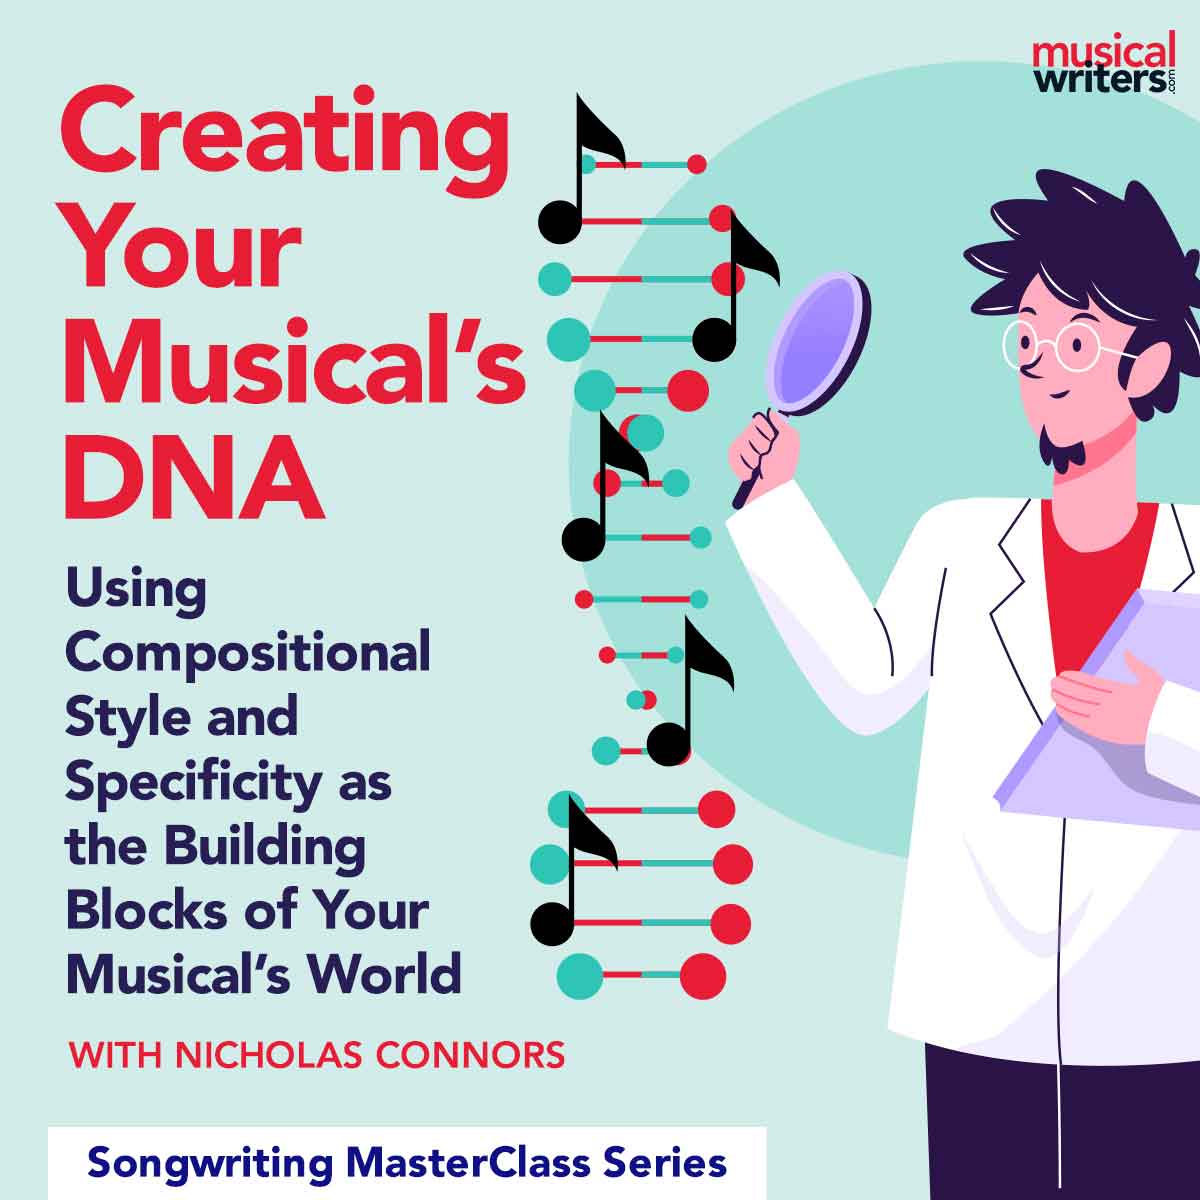 Creating Your Musical's DNA with Nicholas Connors